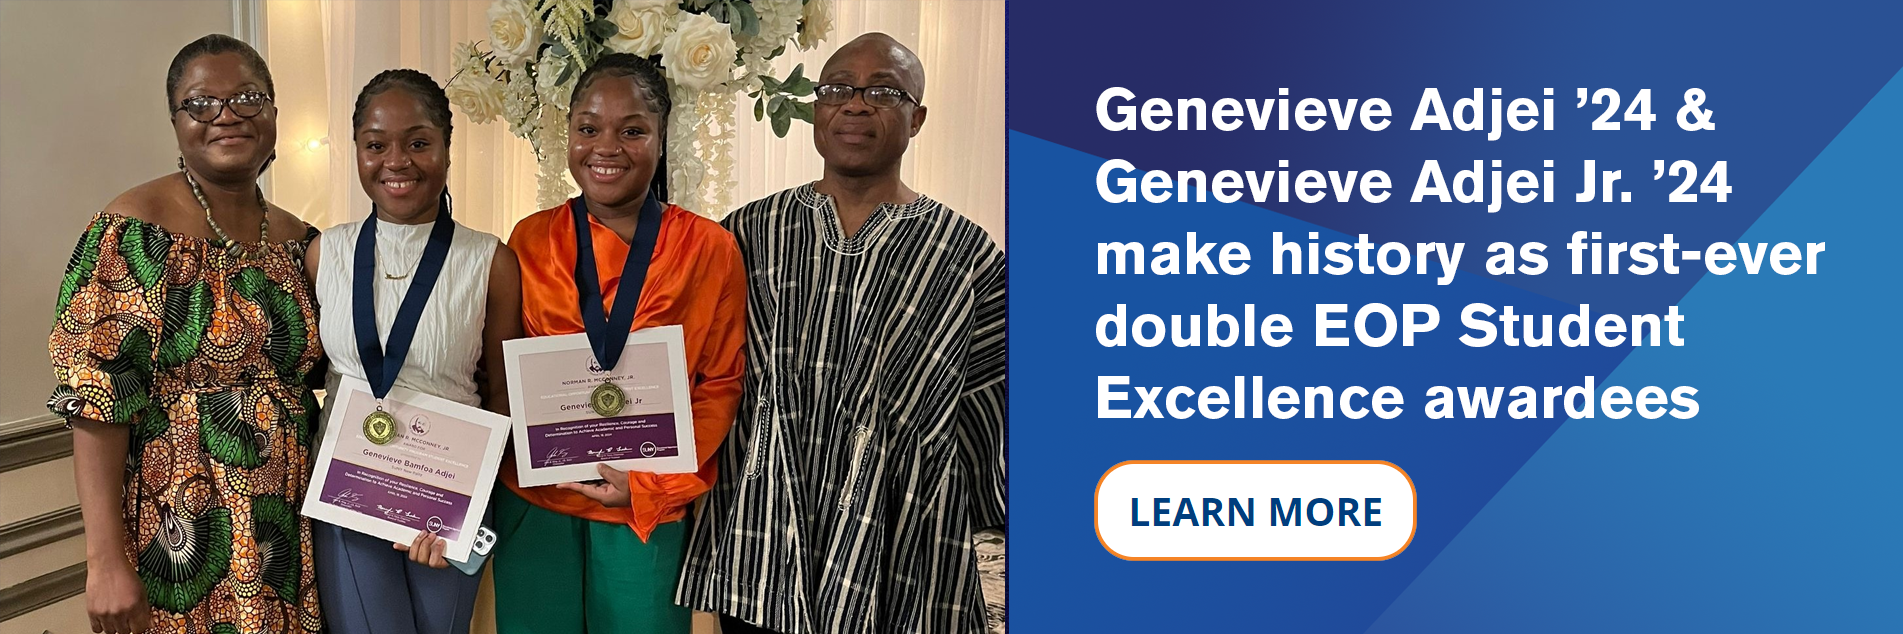 Genevieve Adjei ’24 & Genevieve Adjei Jr. ’24 make history as first-ever double EOP Student Excellence awardees